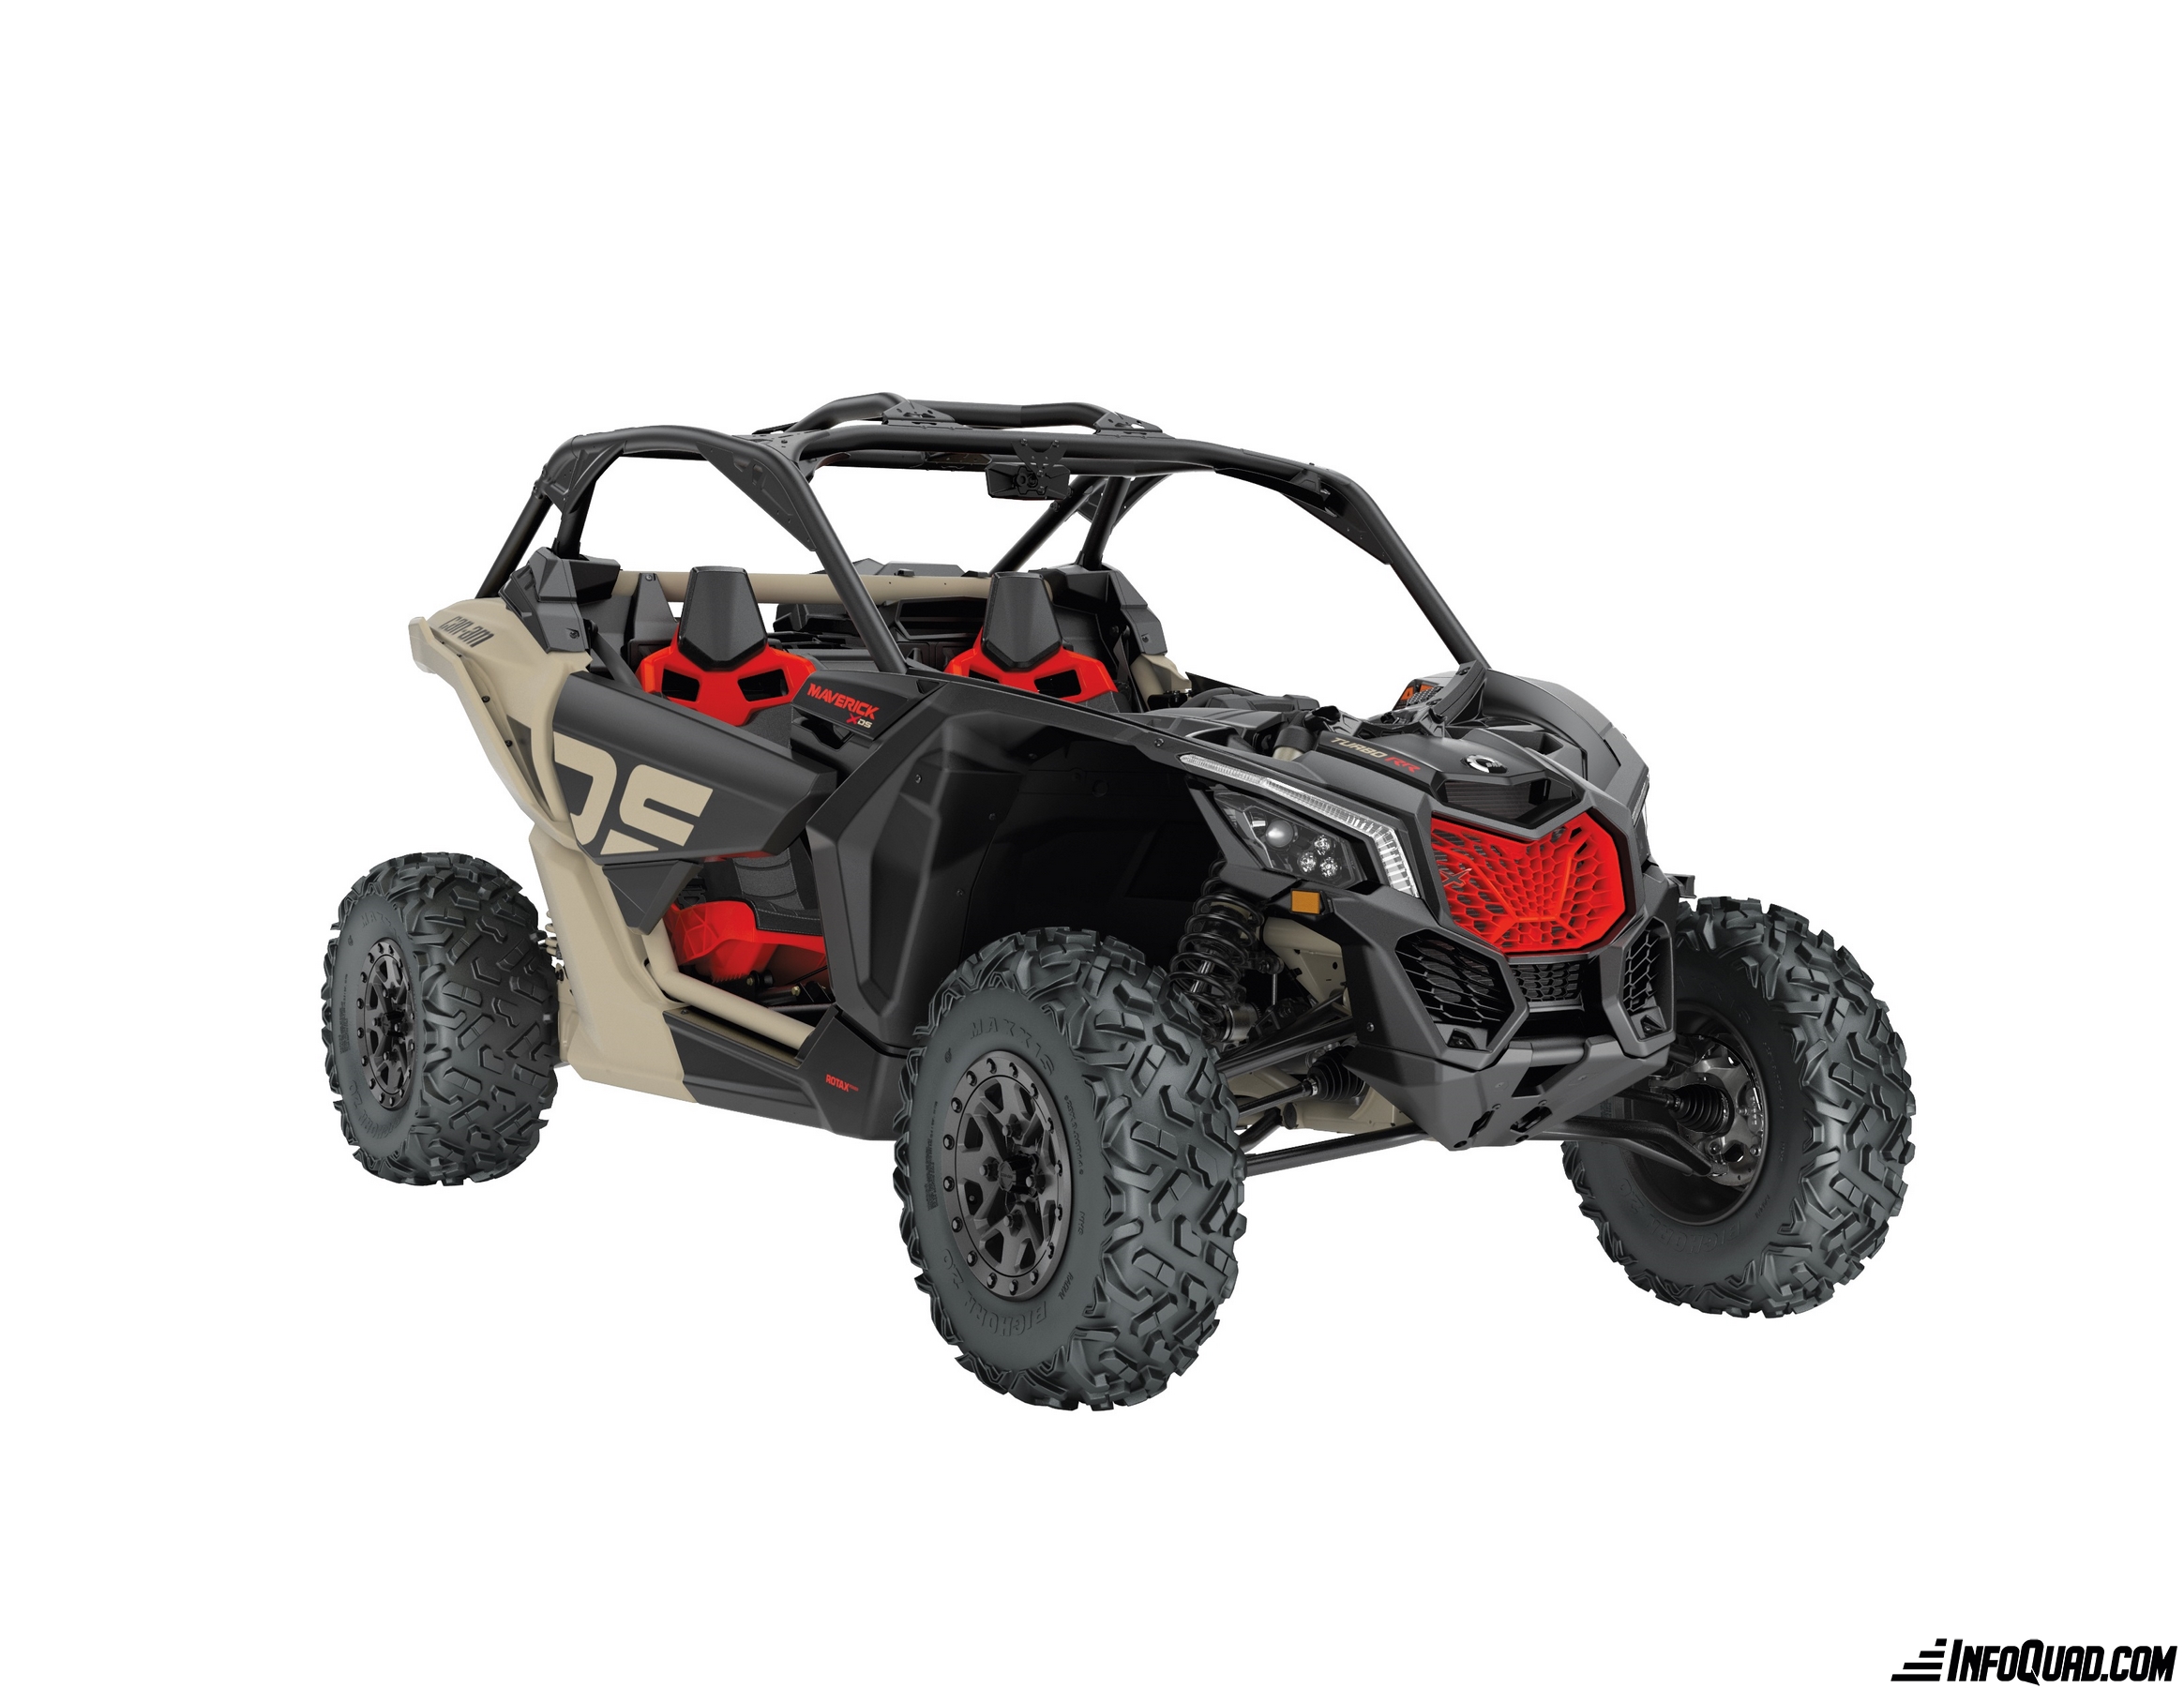 MAVERICK X3 Turbo / X3DS / X3RS / X3X / X3XMR / R and RR version   MAX 4-seater XDS, XRS, XMR, R and RR / SUPER SPORT